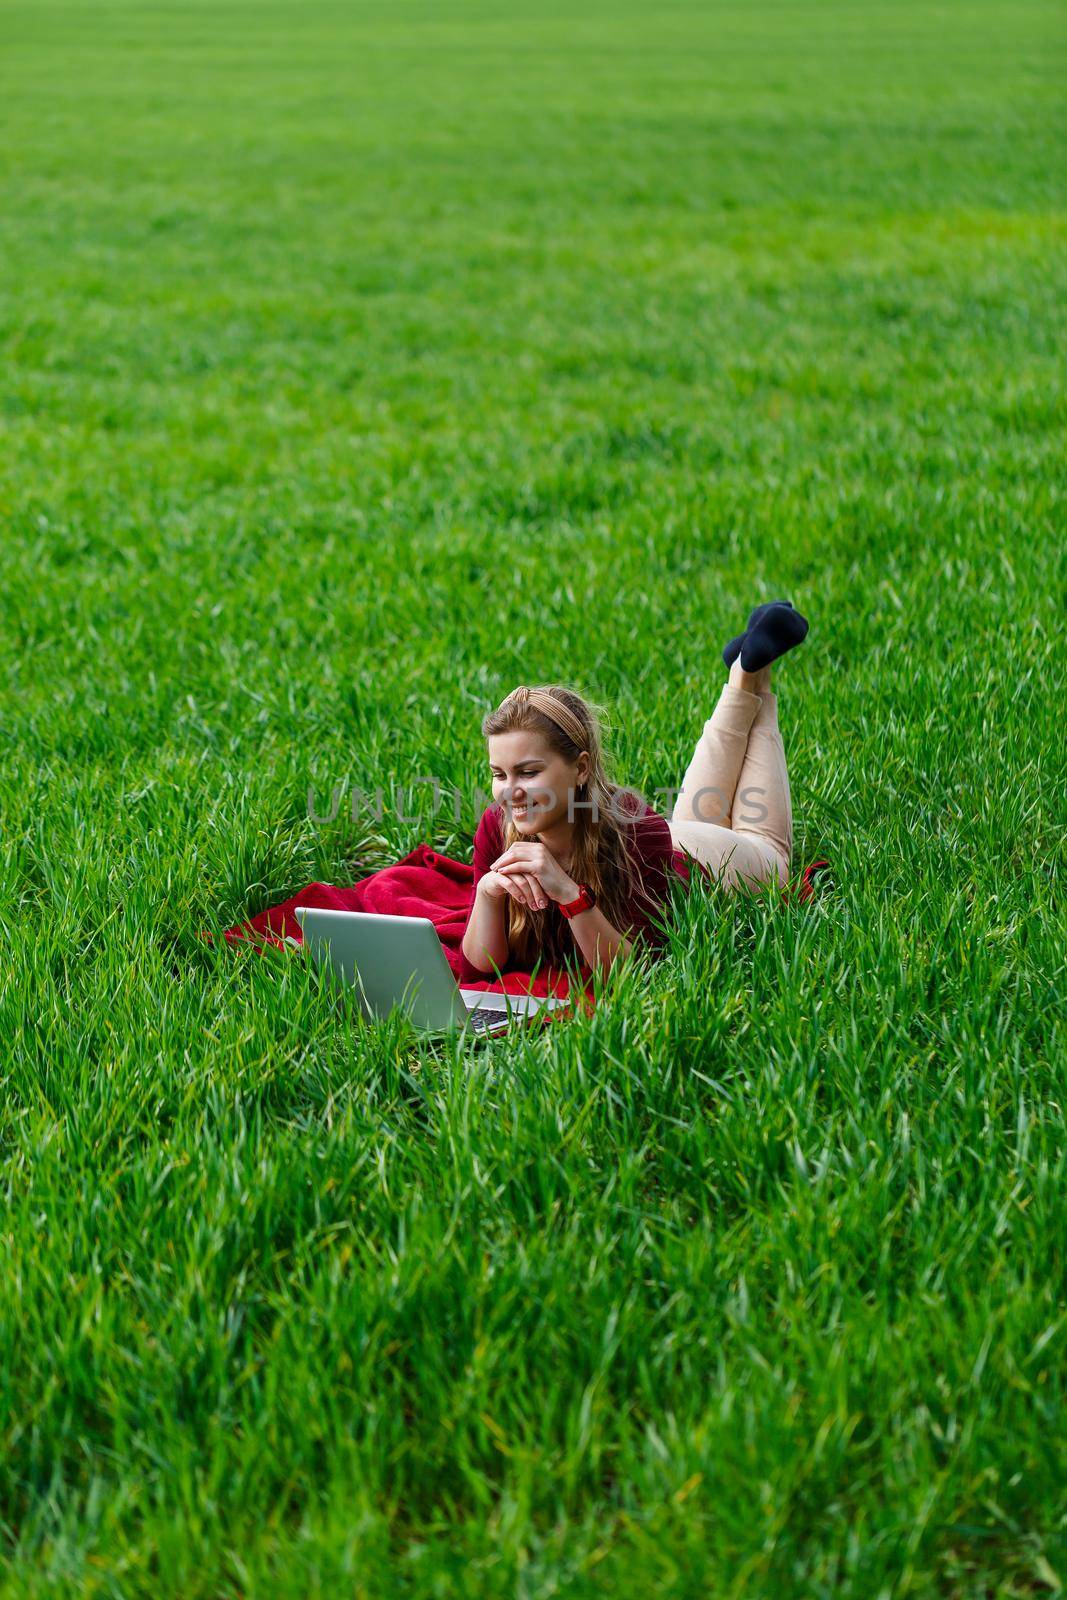 Beautiful young blonde woman is lying on the green grass in the park with a laptop and working. Blue sky with clouds. The girl smiles and enjoys a good day. Work on the nature on a sunny day.